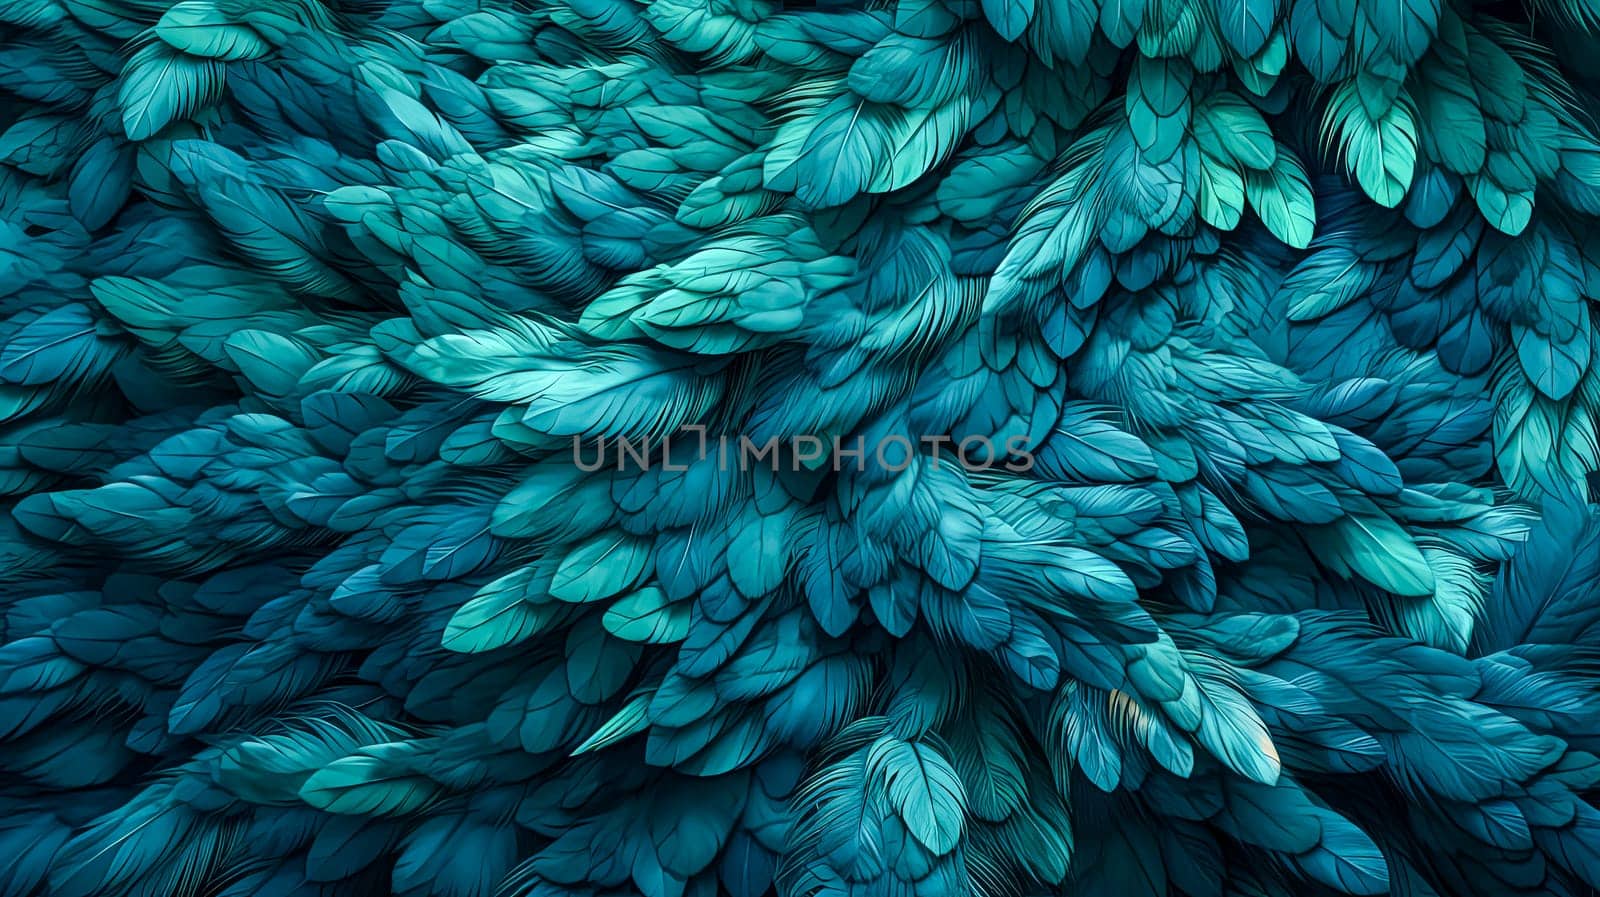 A blue and green feathery background with a lot of feathers. The feathers are all different sizes and colors